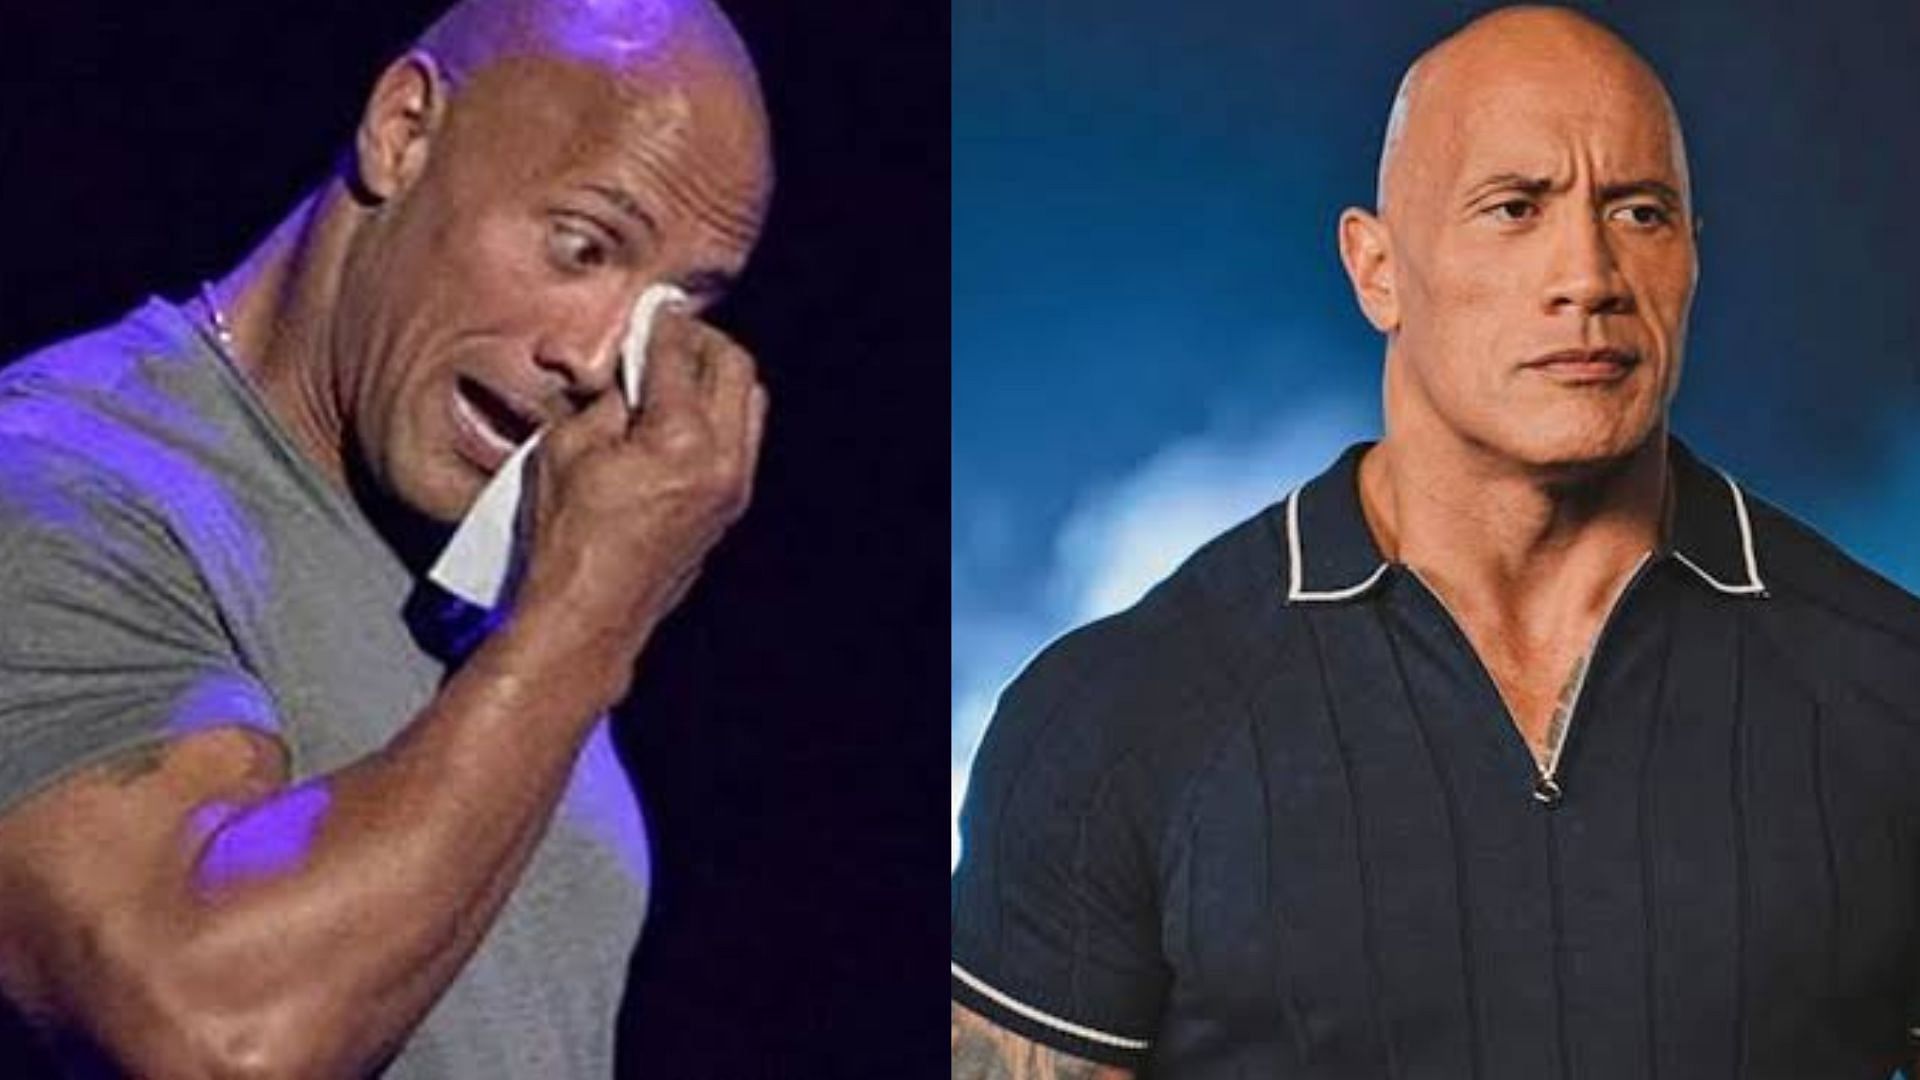 The Rock is one of the most well-recognized wrestlers in the world.